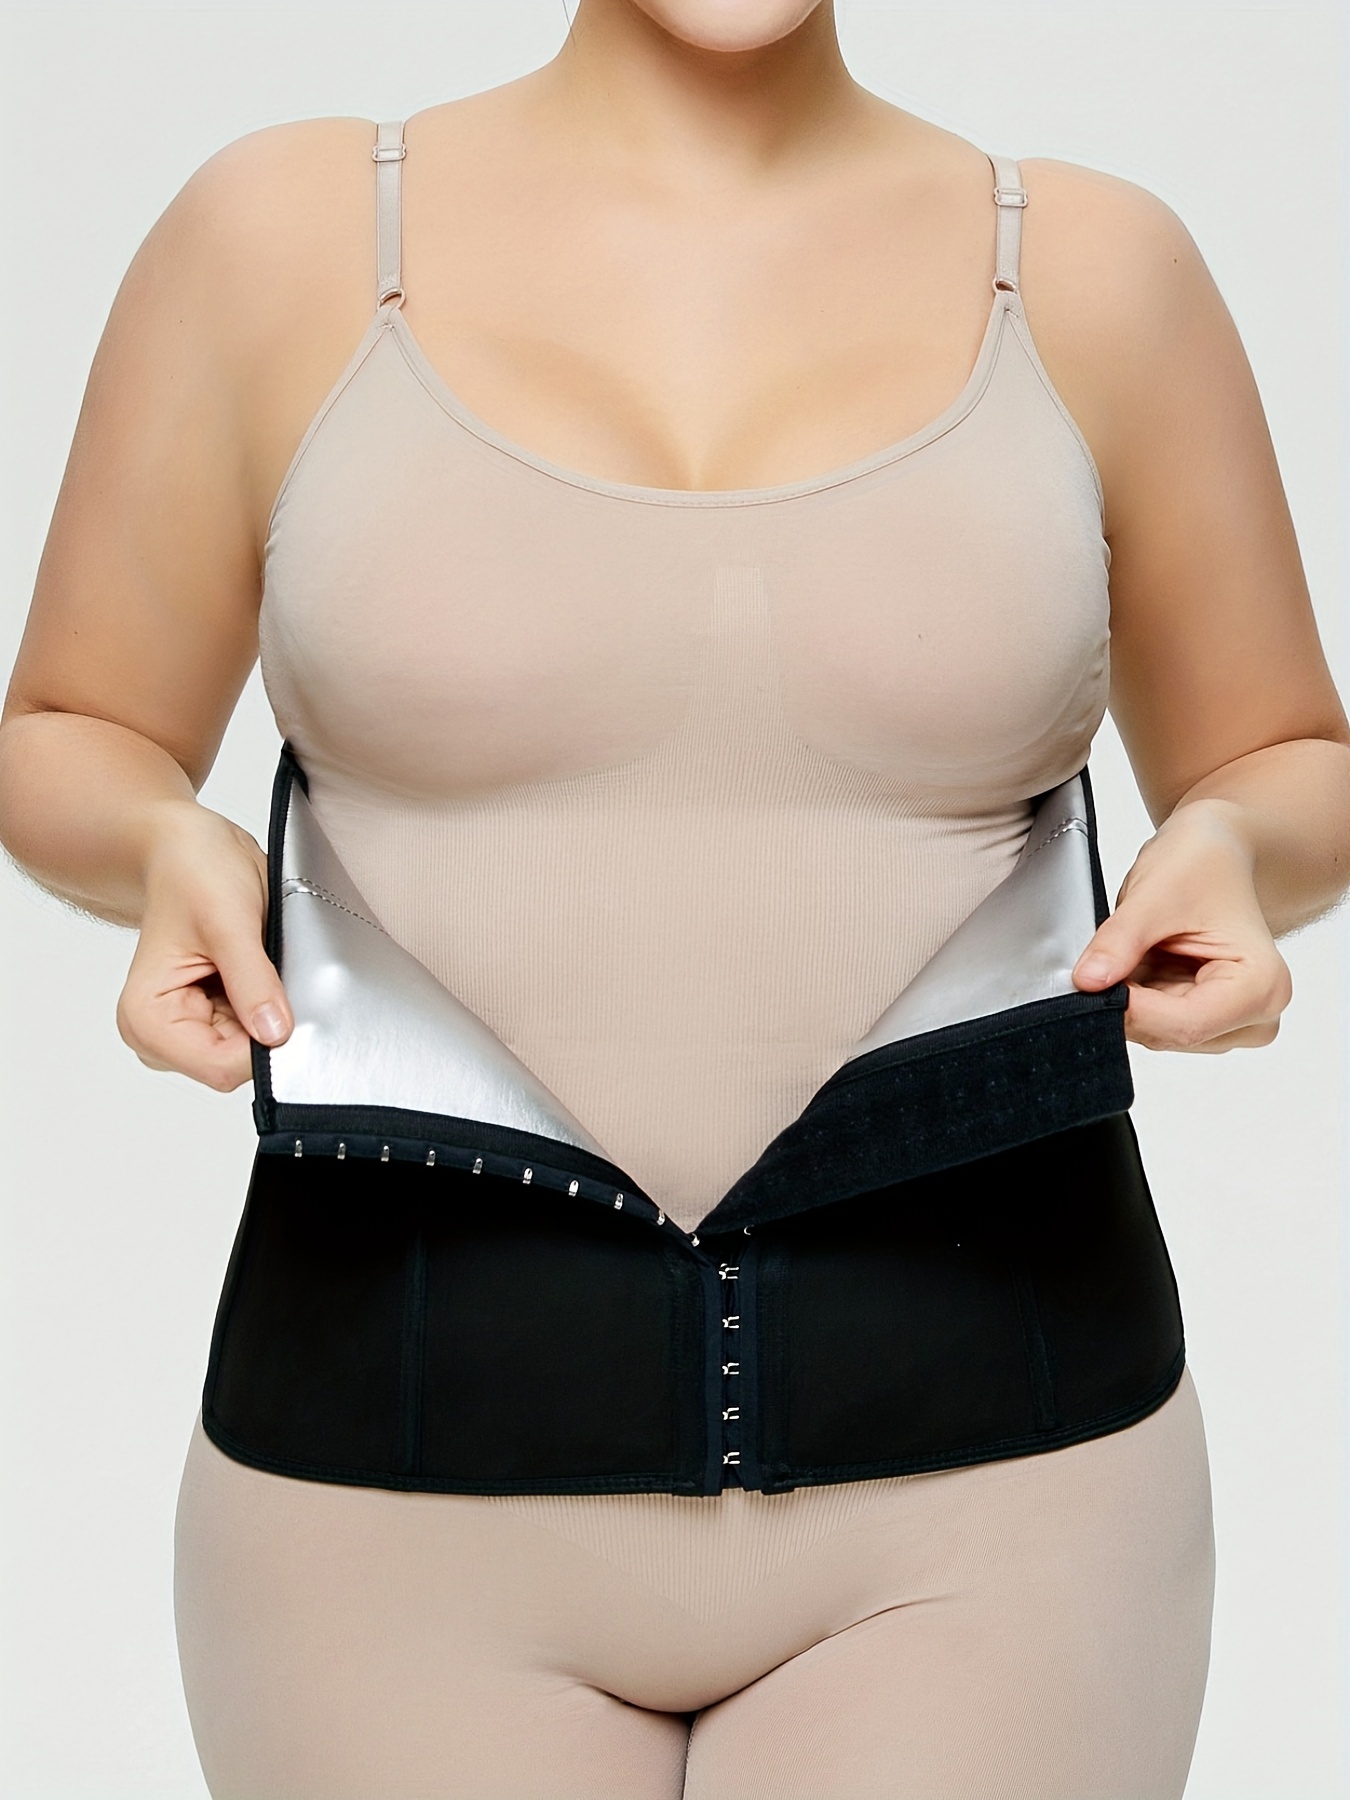 Plus Size Black Work Out Waist Trainer